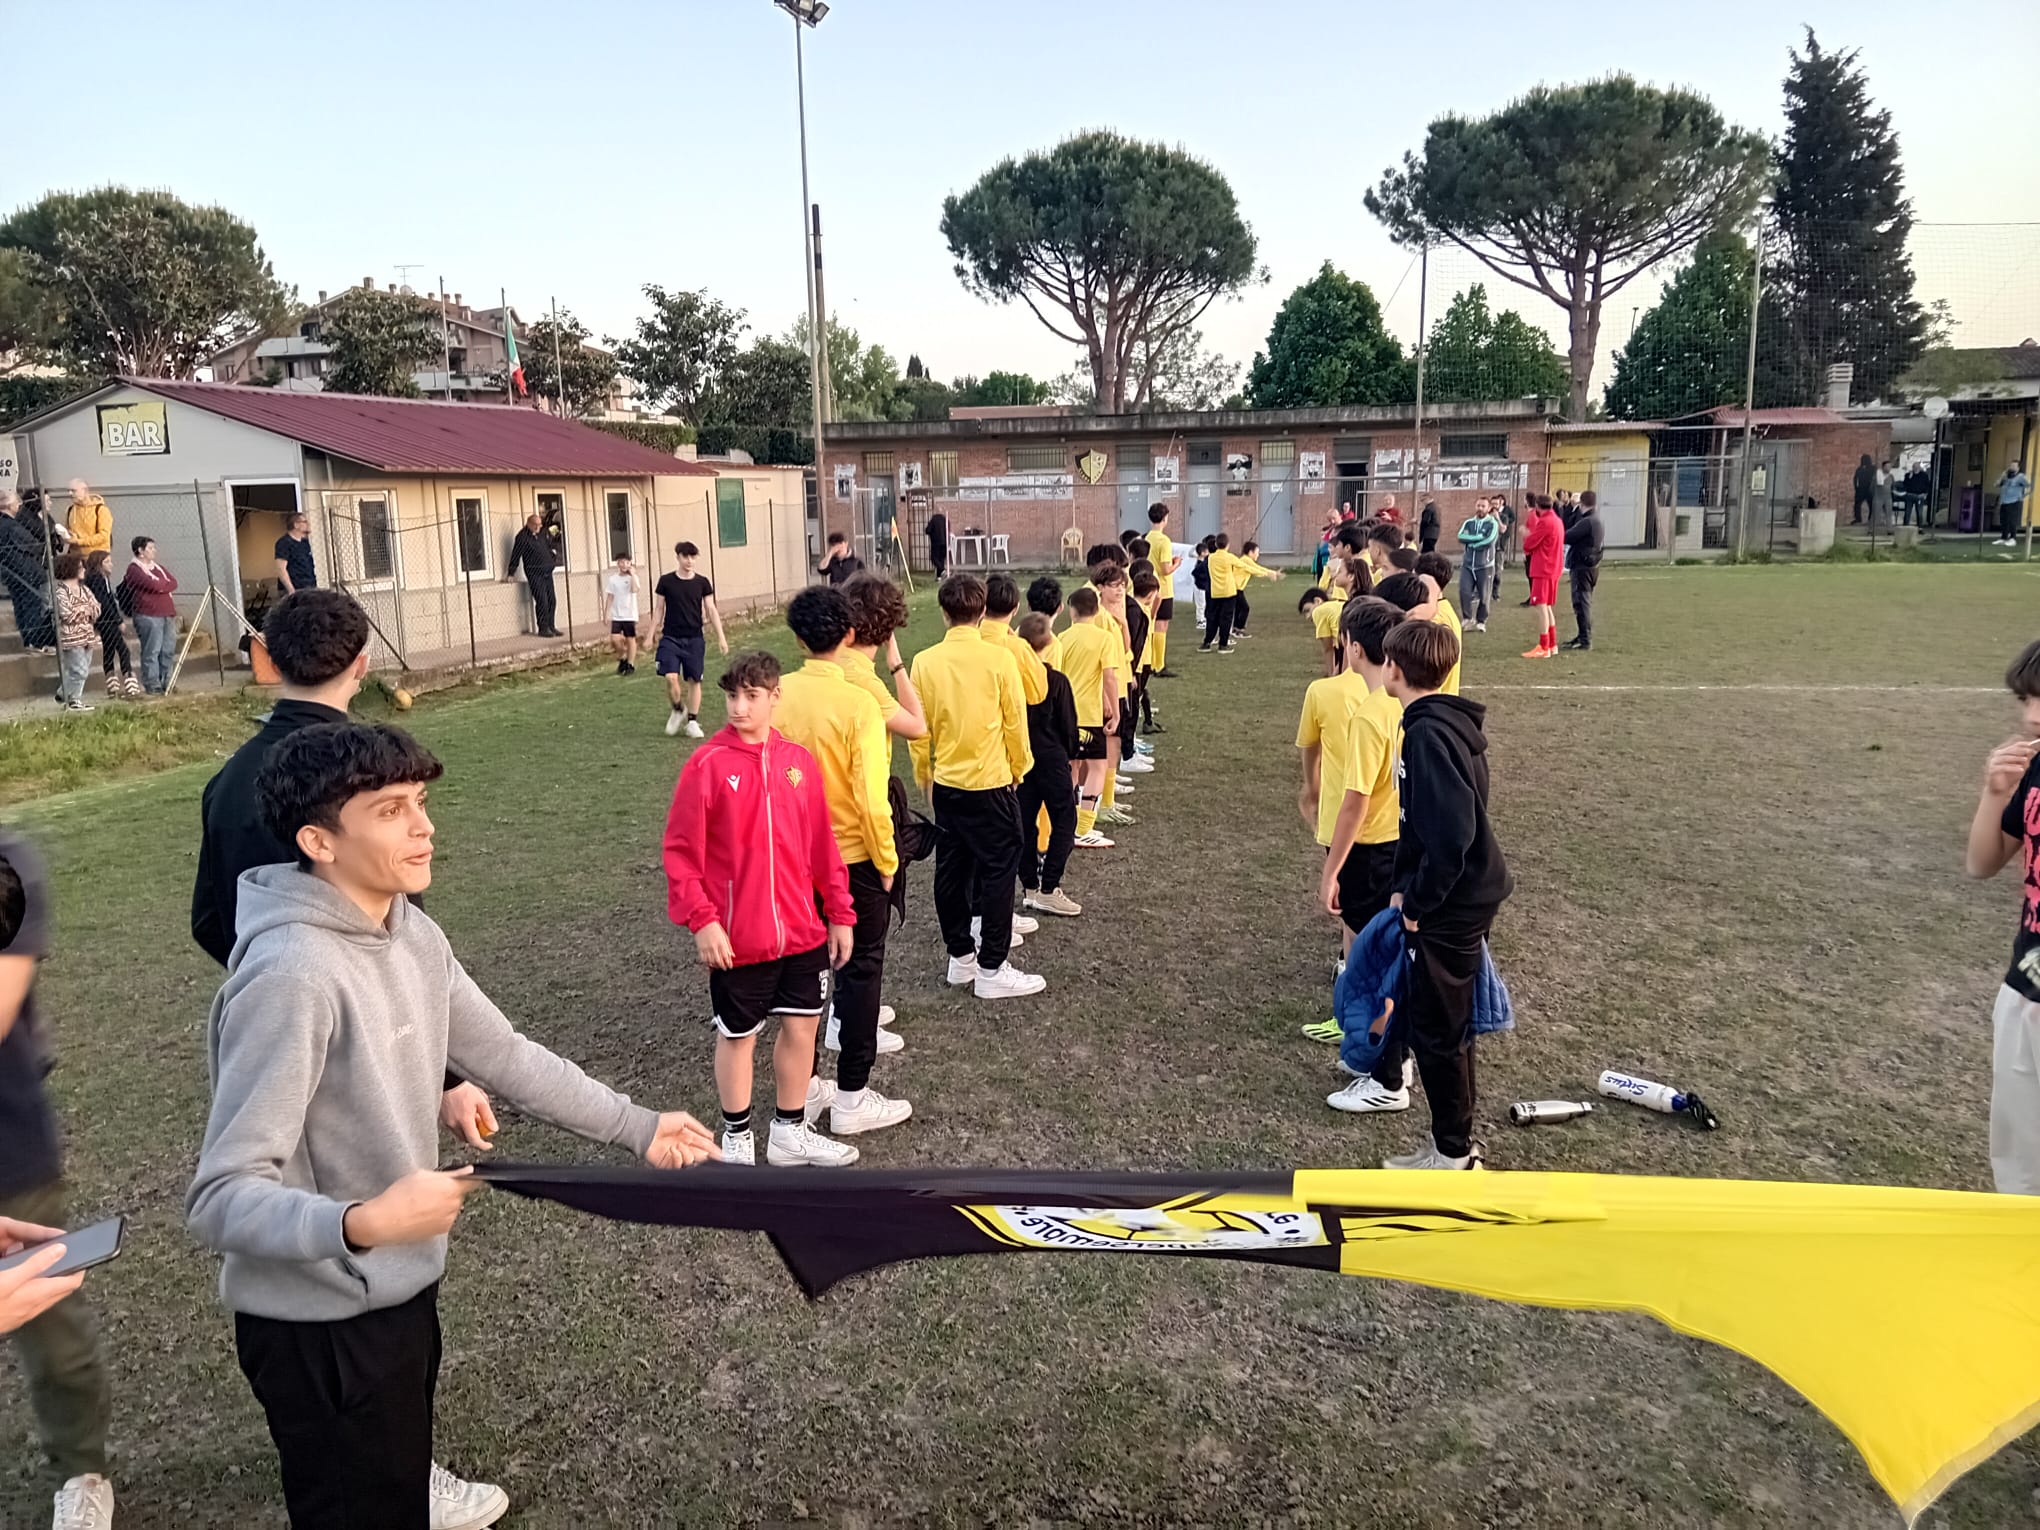 In Avan, the football school awards the “Paselo di Honor” to the first team